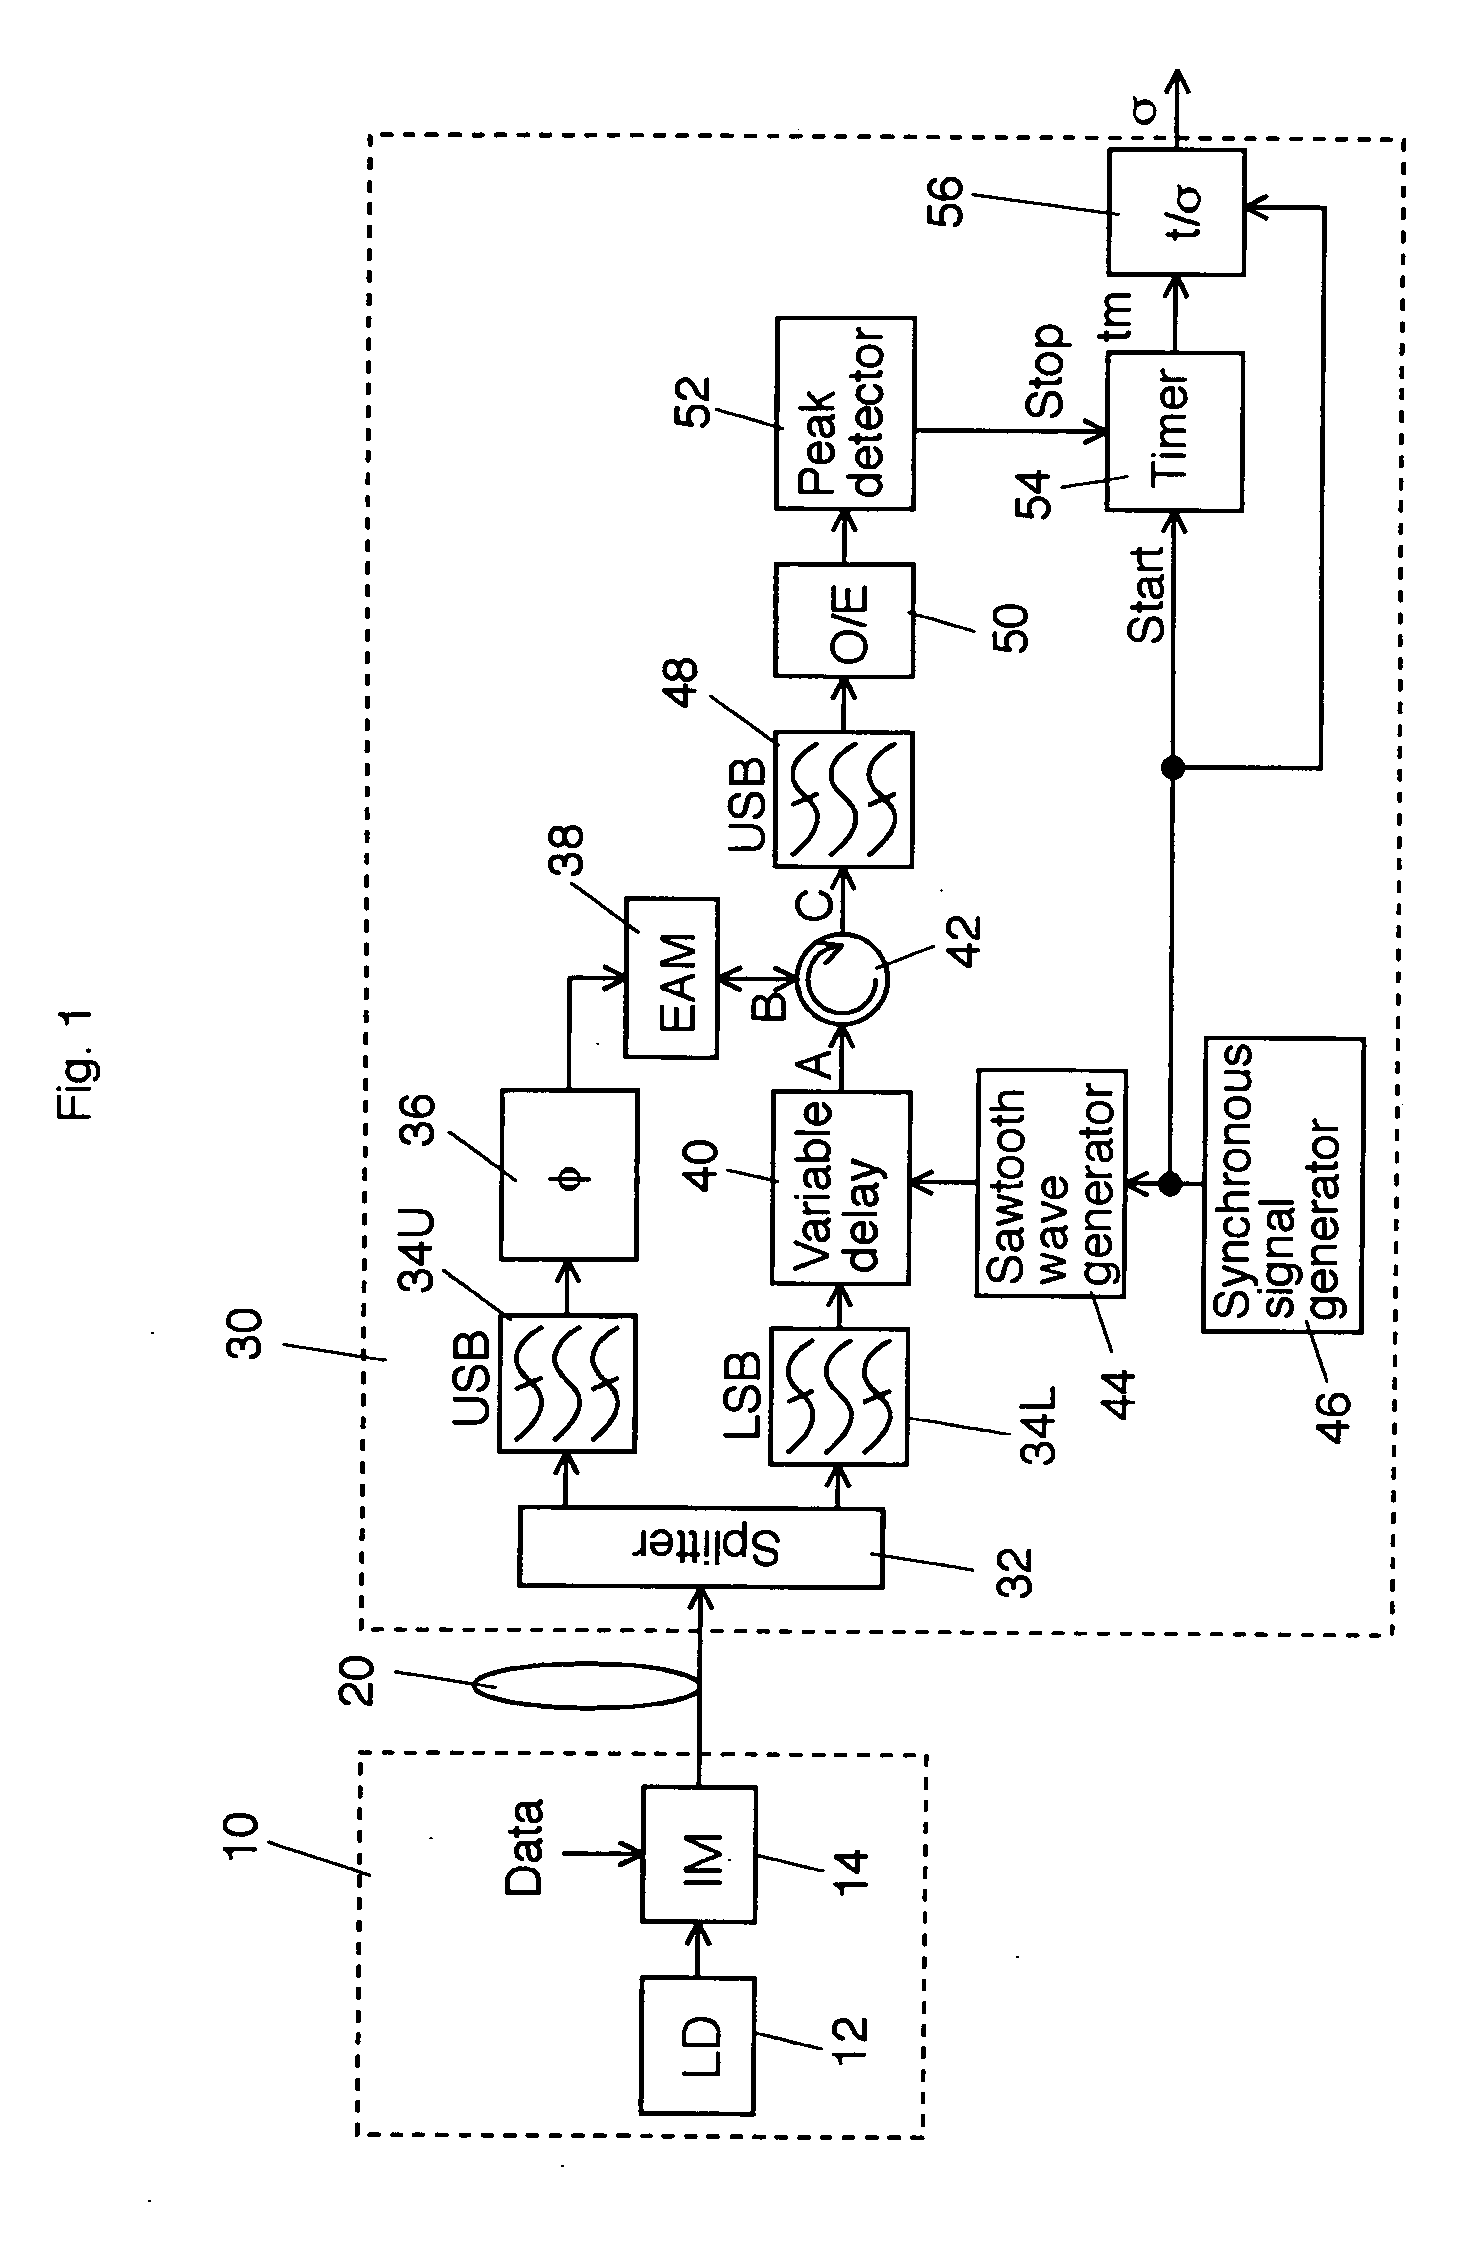 Method and apparatus for measuring chromatic dispersion